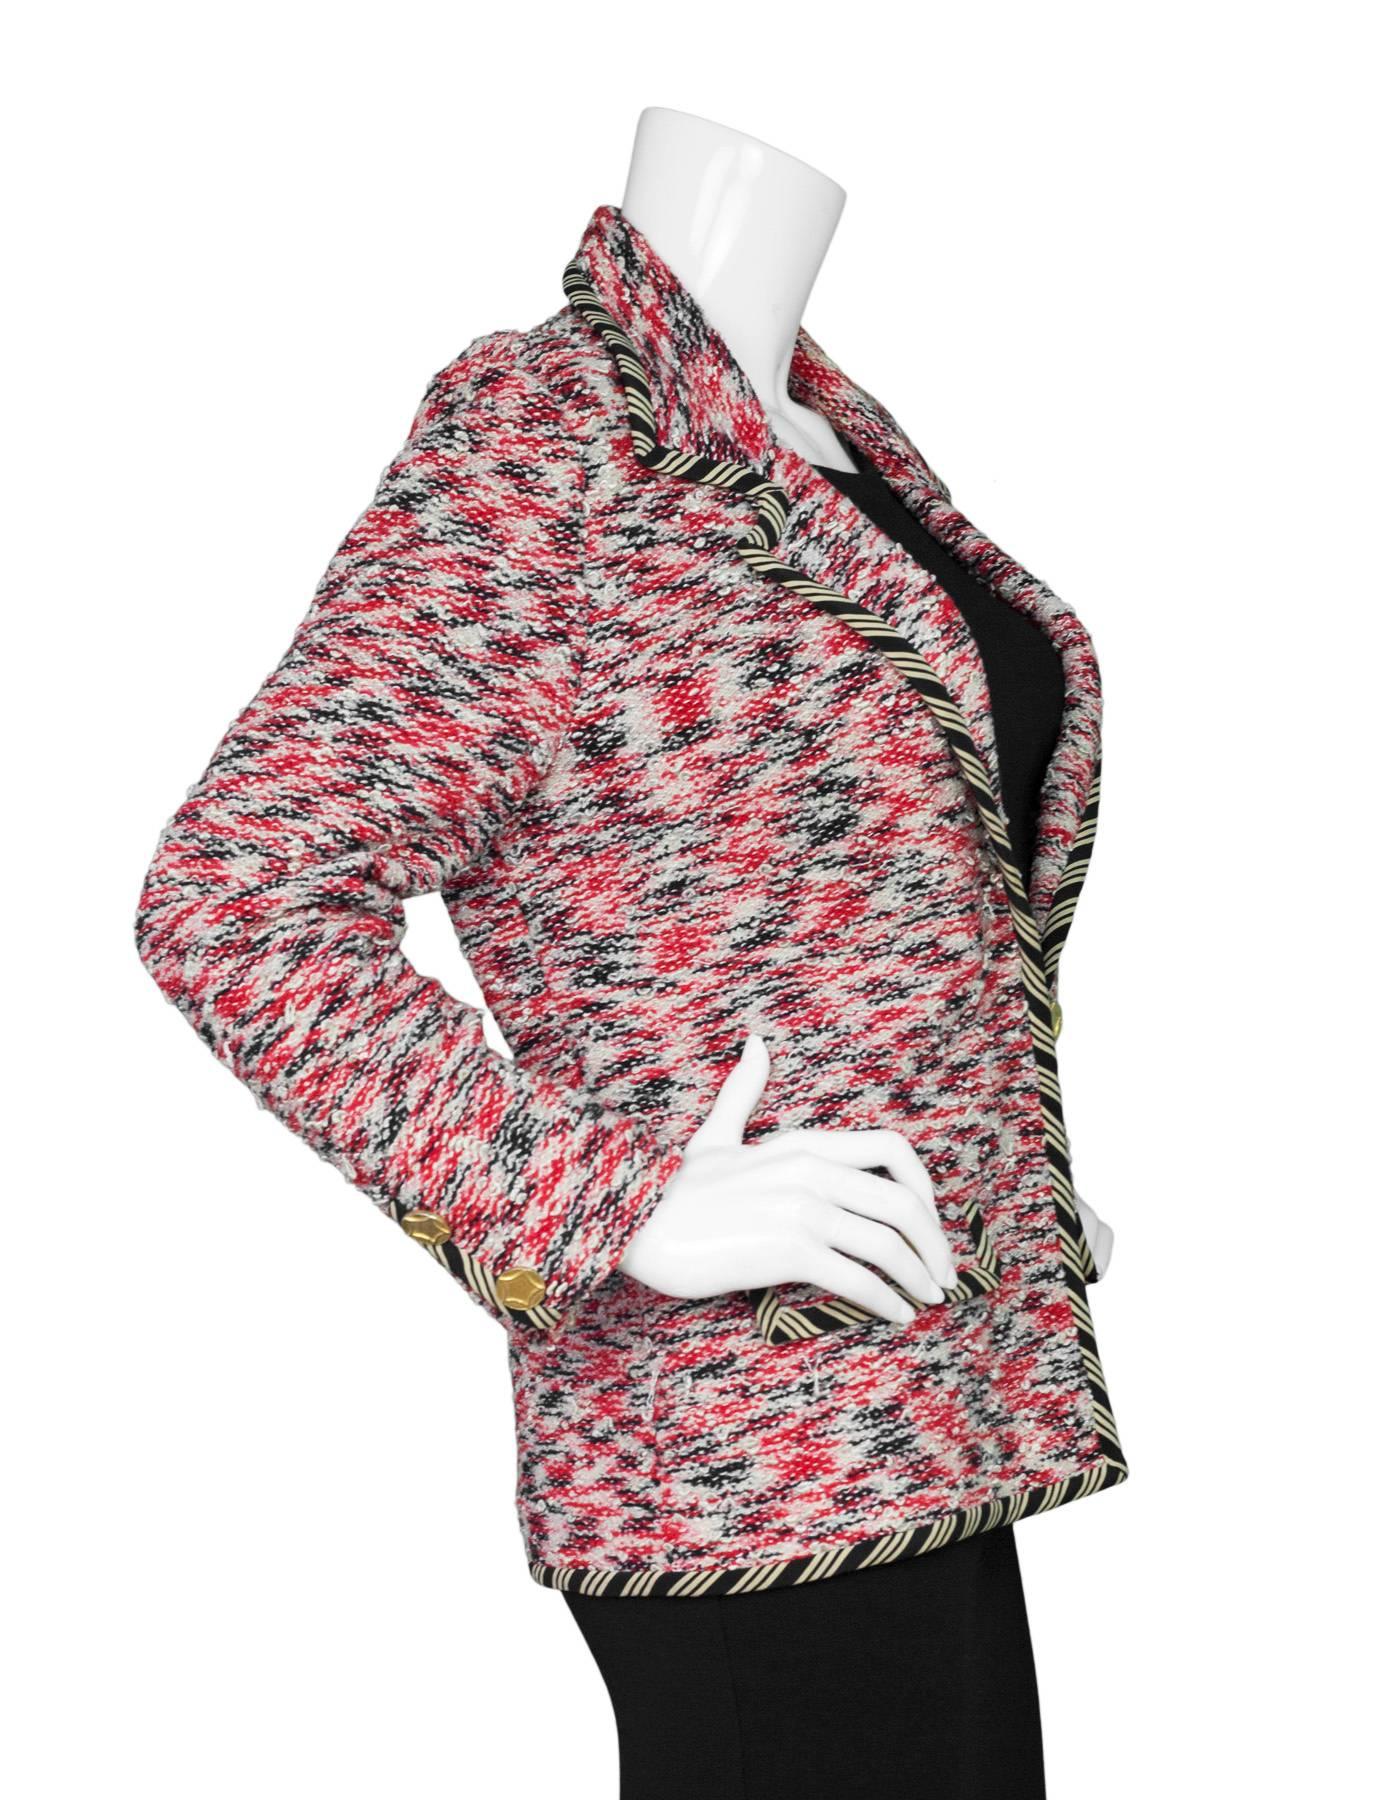 Adolfo Multi-Colored Tweed & Silk Jacket 
Features beige and black silk trim throughout

Made In: USA
Color: Black, red, white and beige
Composition: 100% wool
Lining: None
Closure/Opening: Button down front
Exterior Pockets: Two faux hip